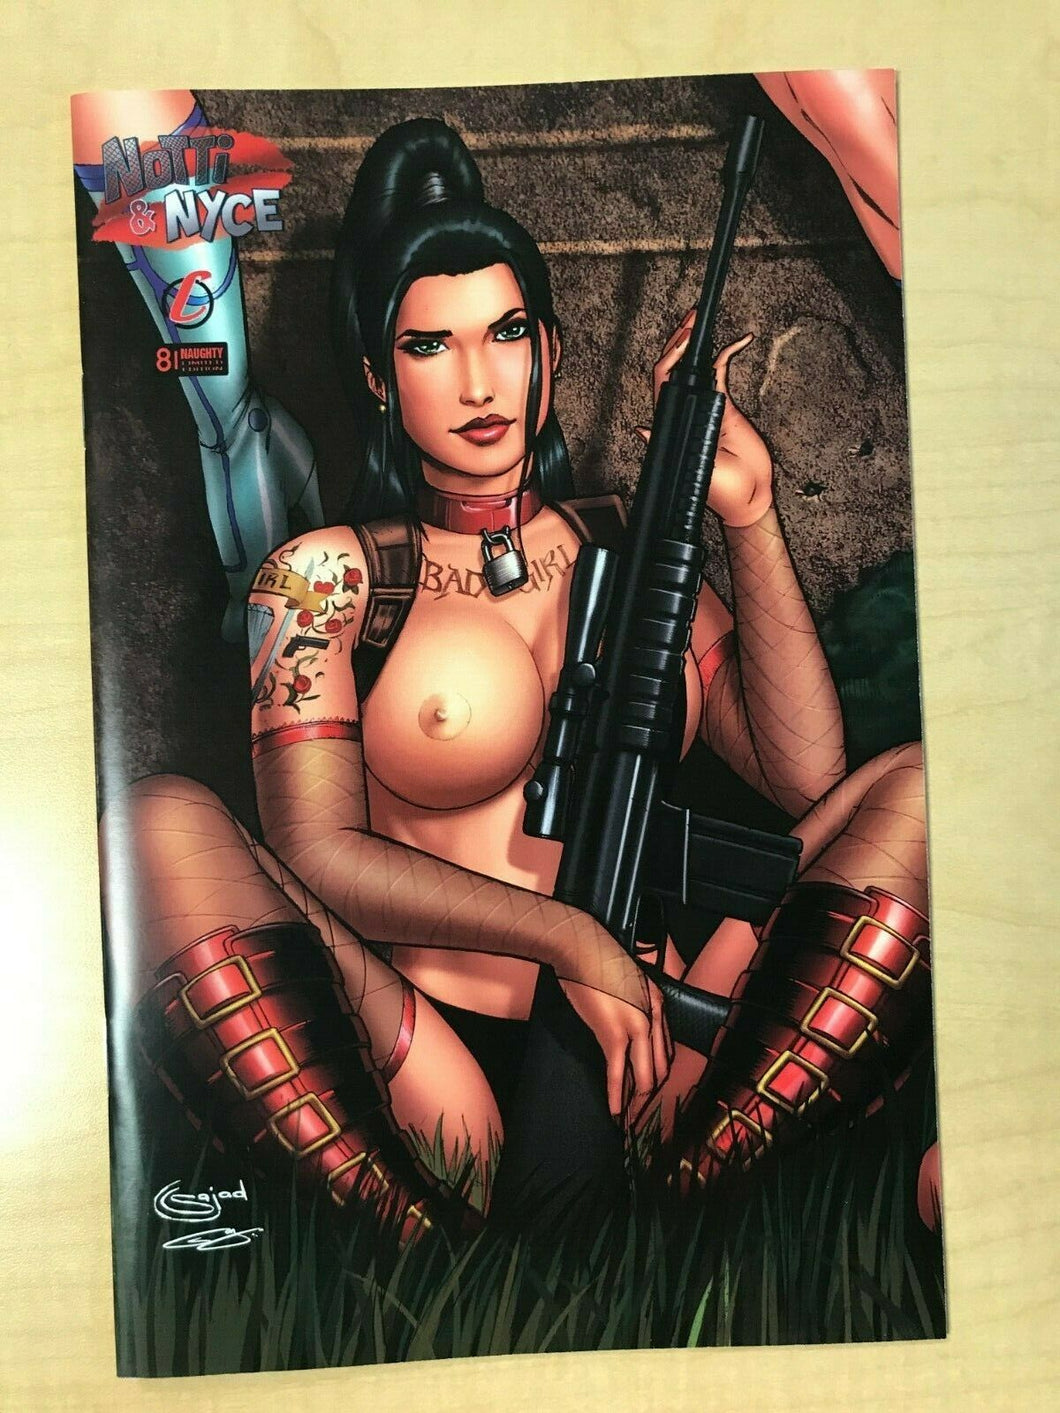 Notti & Nyce #8 Sajad Shah NAUGHTY TOPLESS Variant Cover Counterpoint Comics